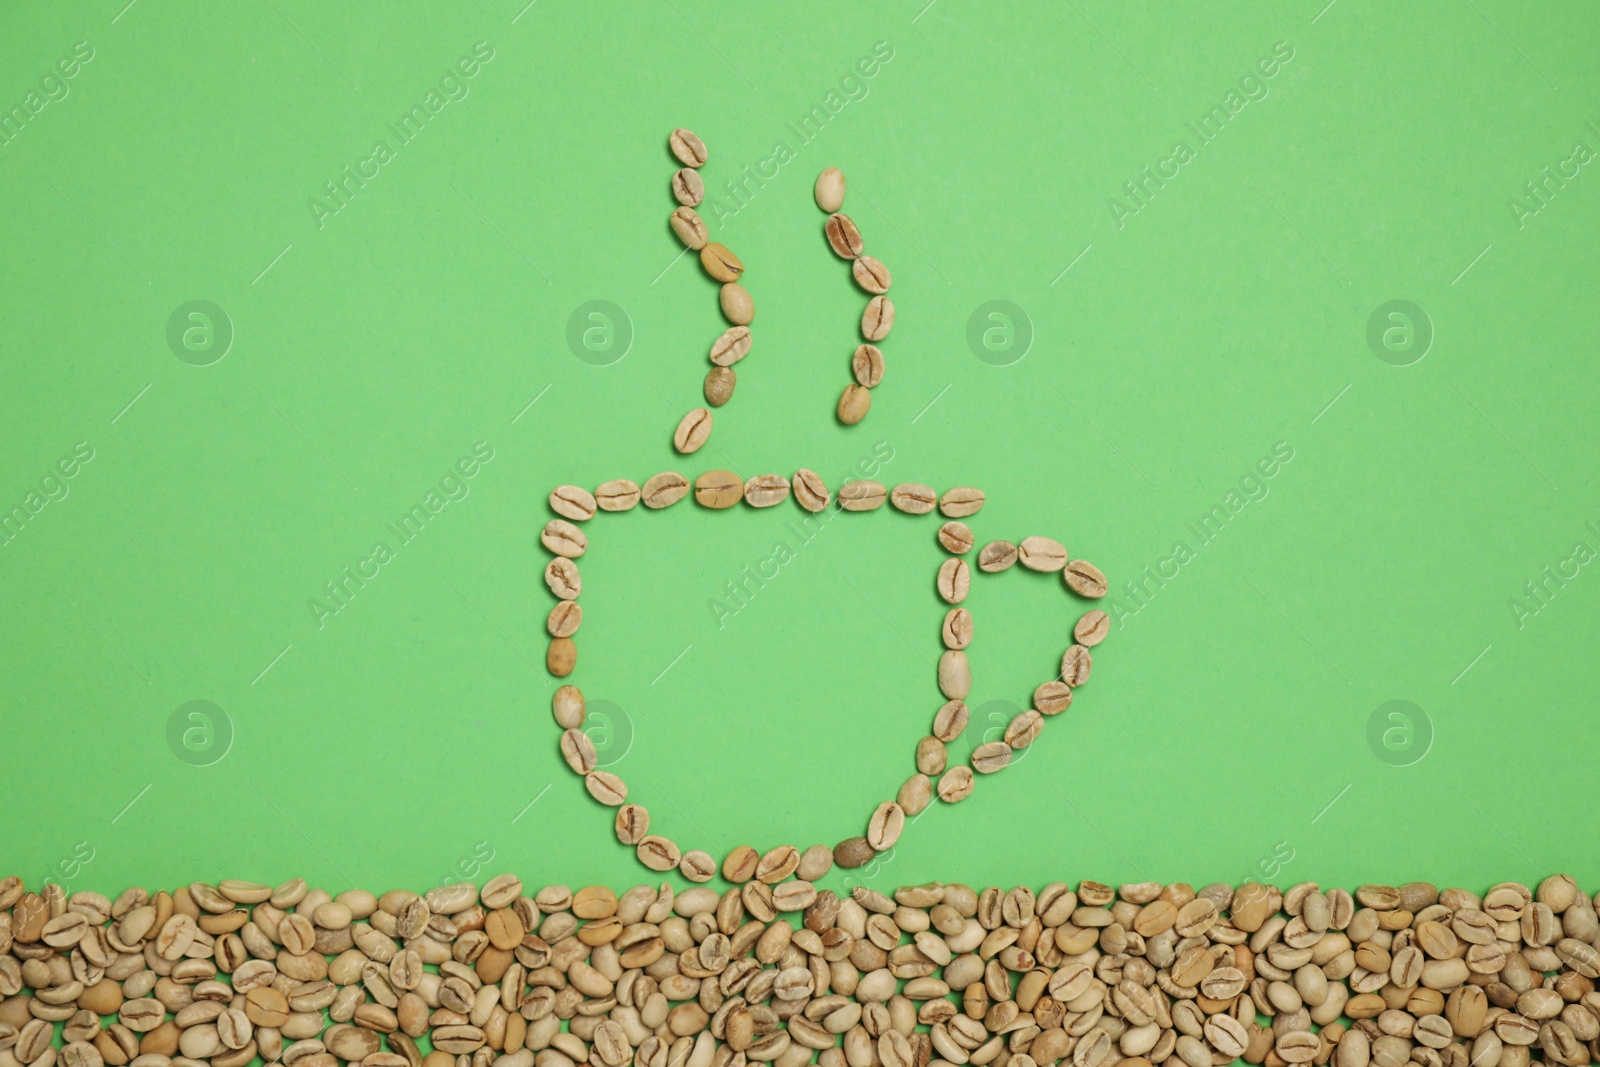 Photo of Cup of hot drink, composition made with coffee beans on green background, flat lay